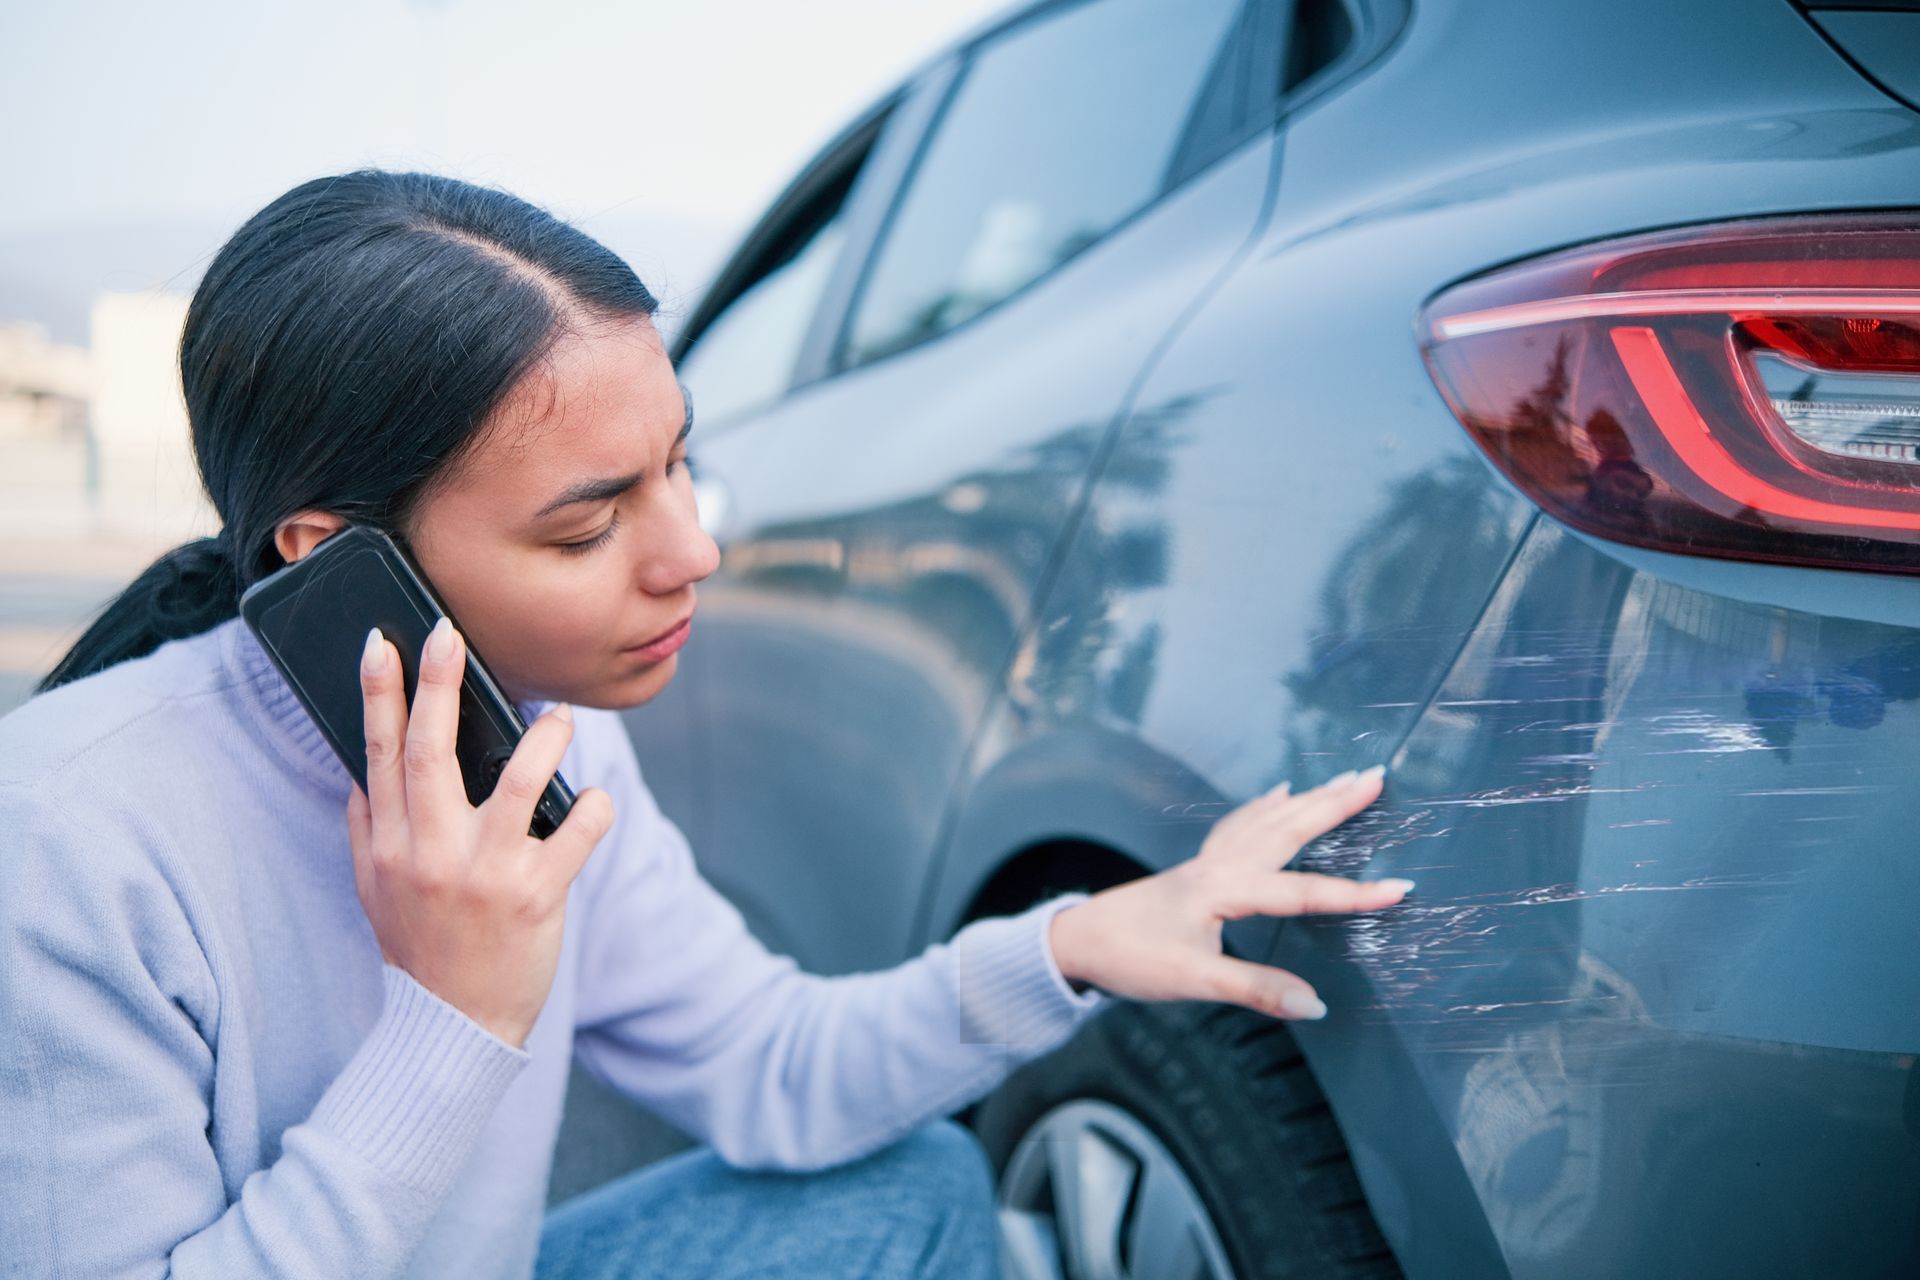 a woman is talking on a cell phone while touching a scratched car